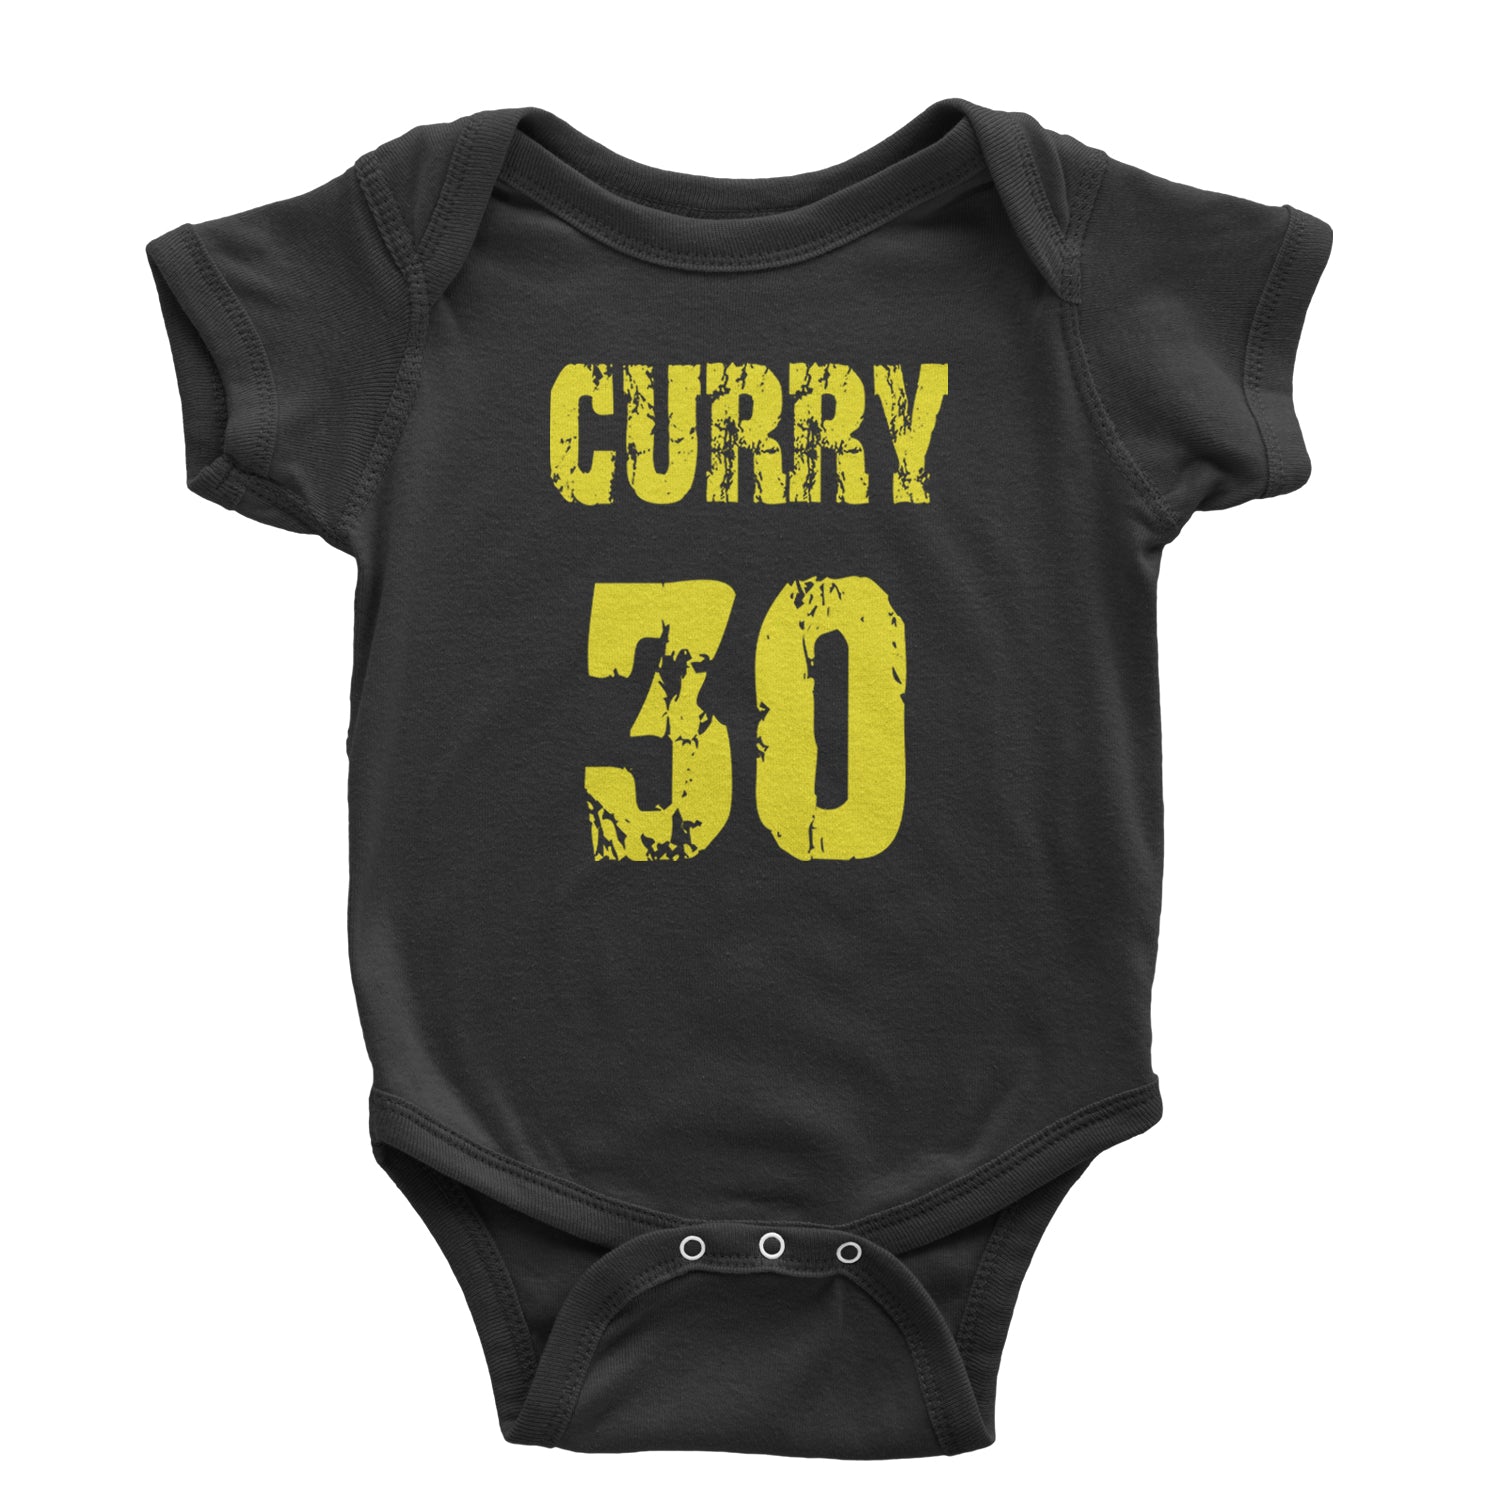 Curry #30 Infant One-Piece Romper Bodysuit and Toddler T-shirt